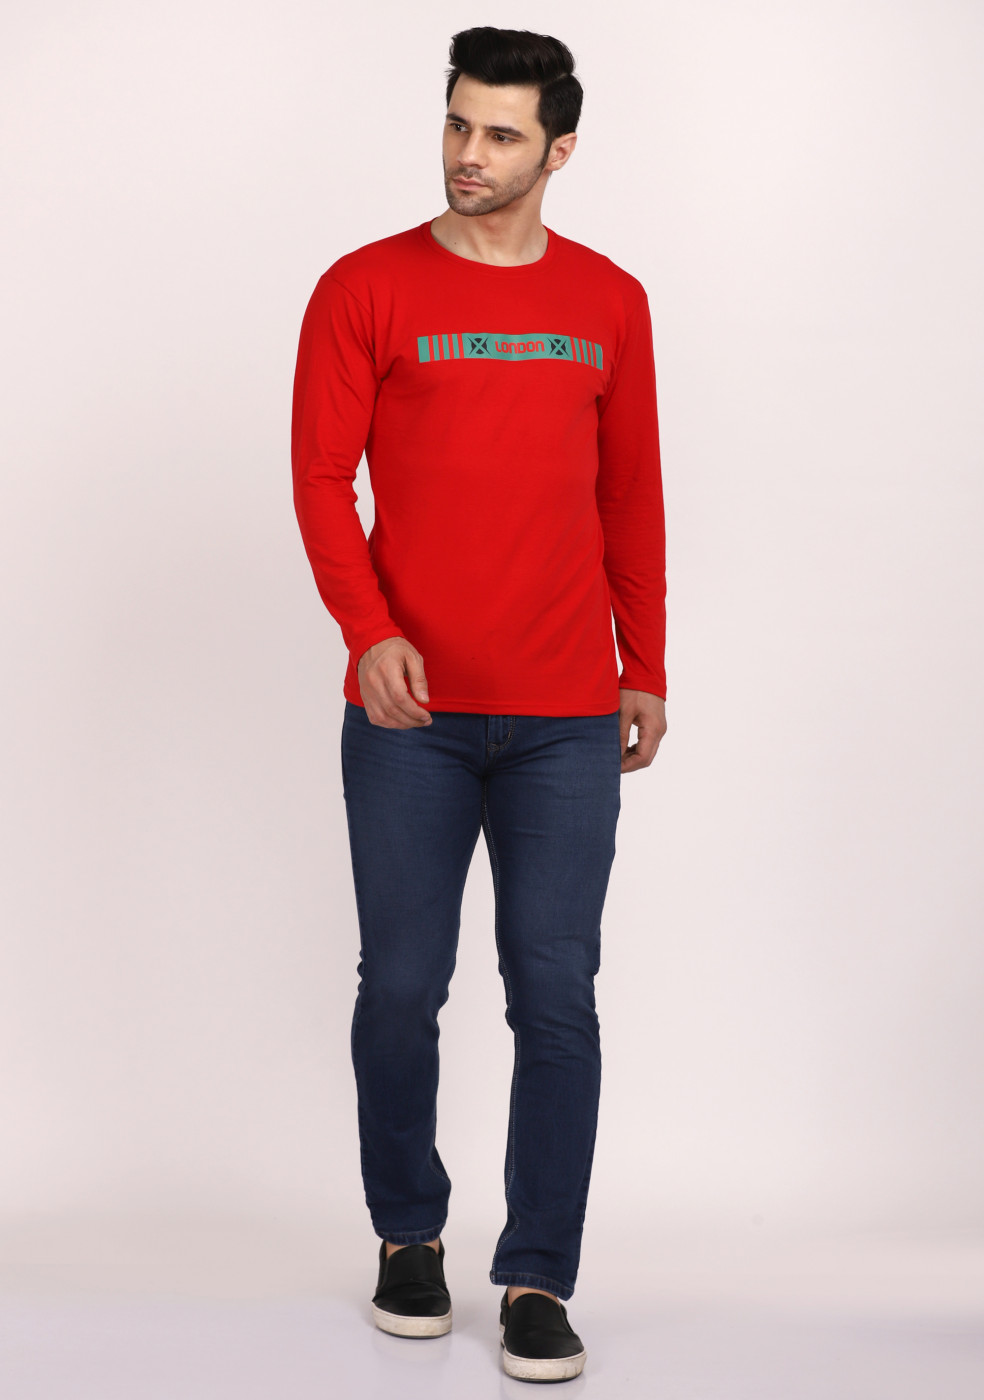 HUKH Red Slim Fit Cotton Lycra T Shirt Full Sleeve Round Neck For Men